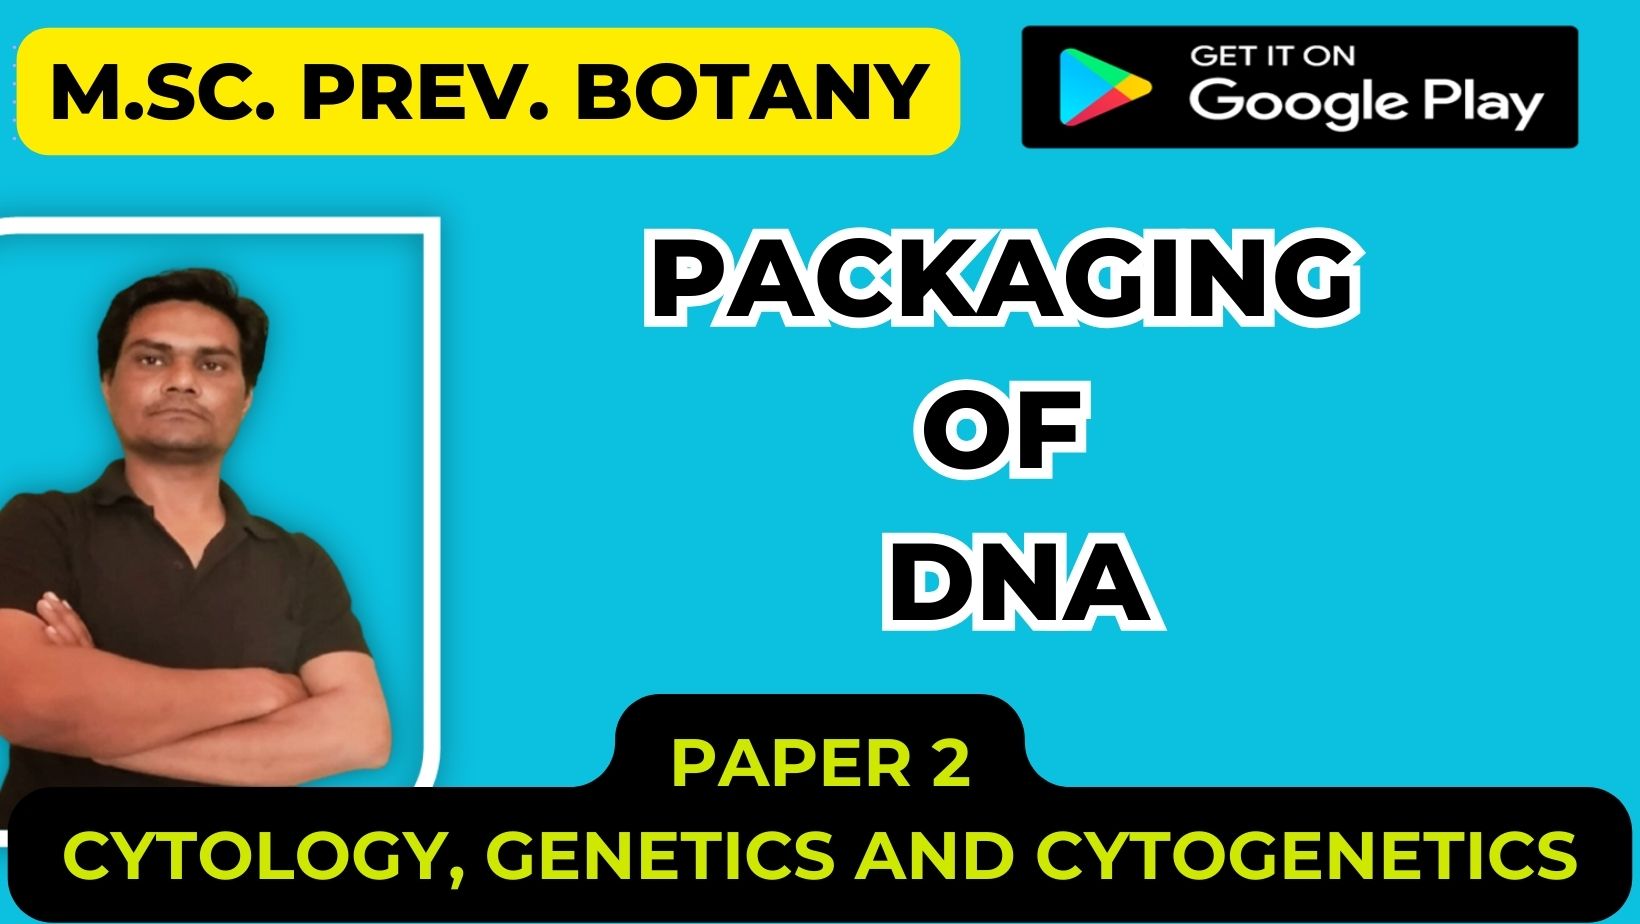 PACKAGING OF DNA